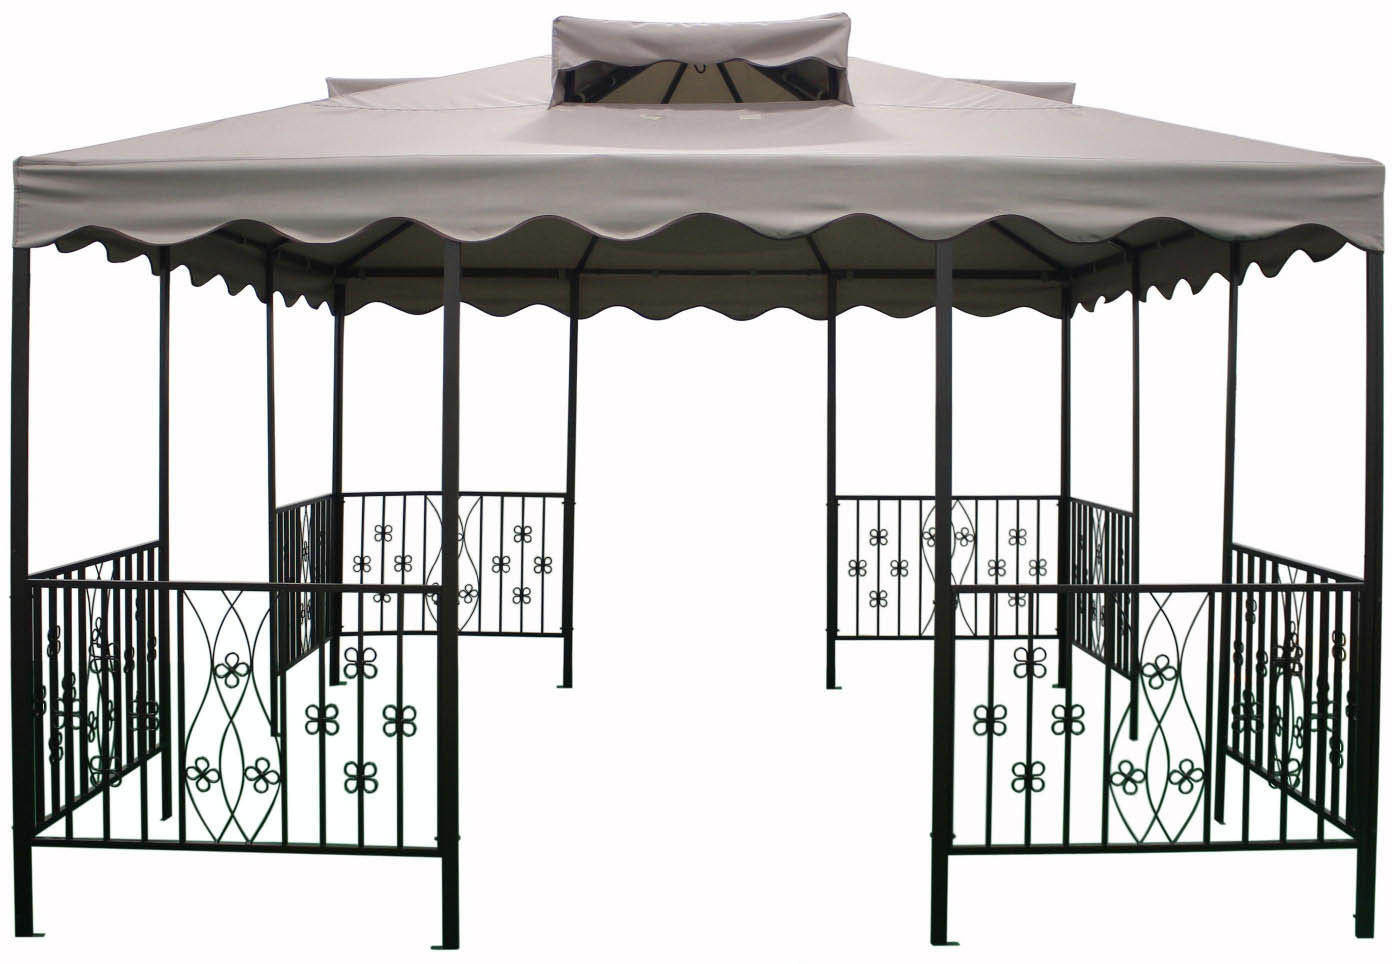 Vignola 15' x 15' Gazebo Kit with Taupe Color Canopy Top